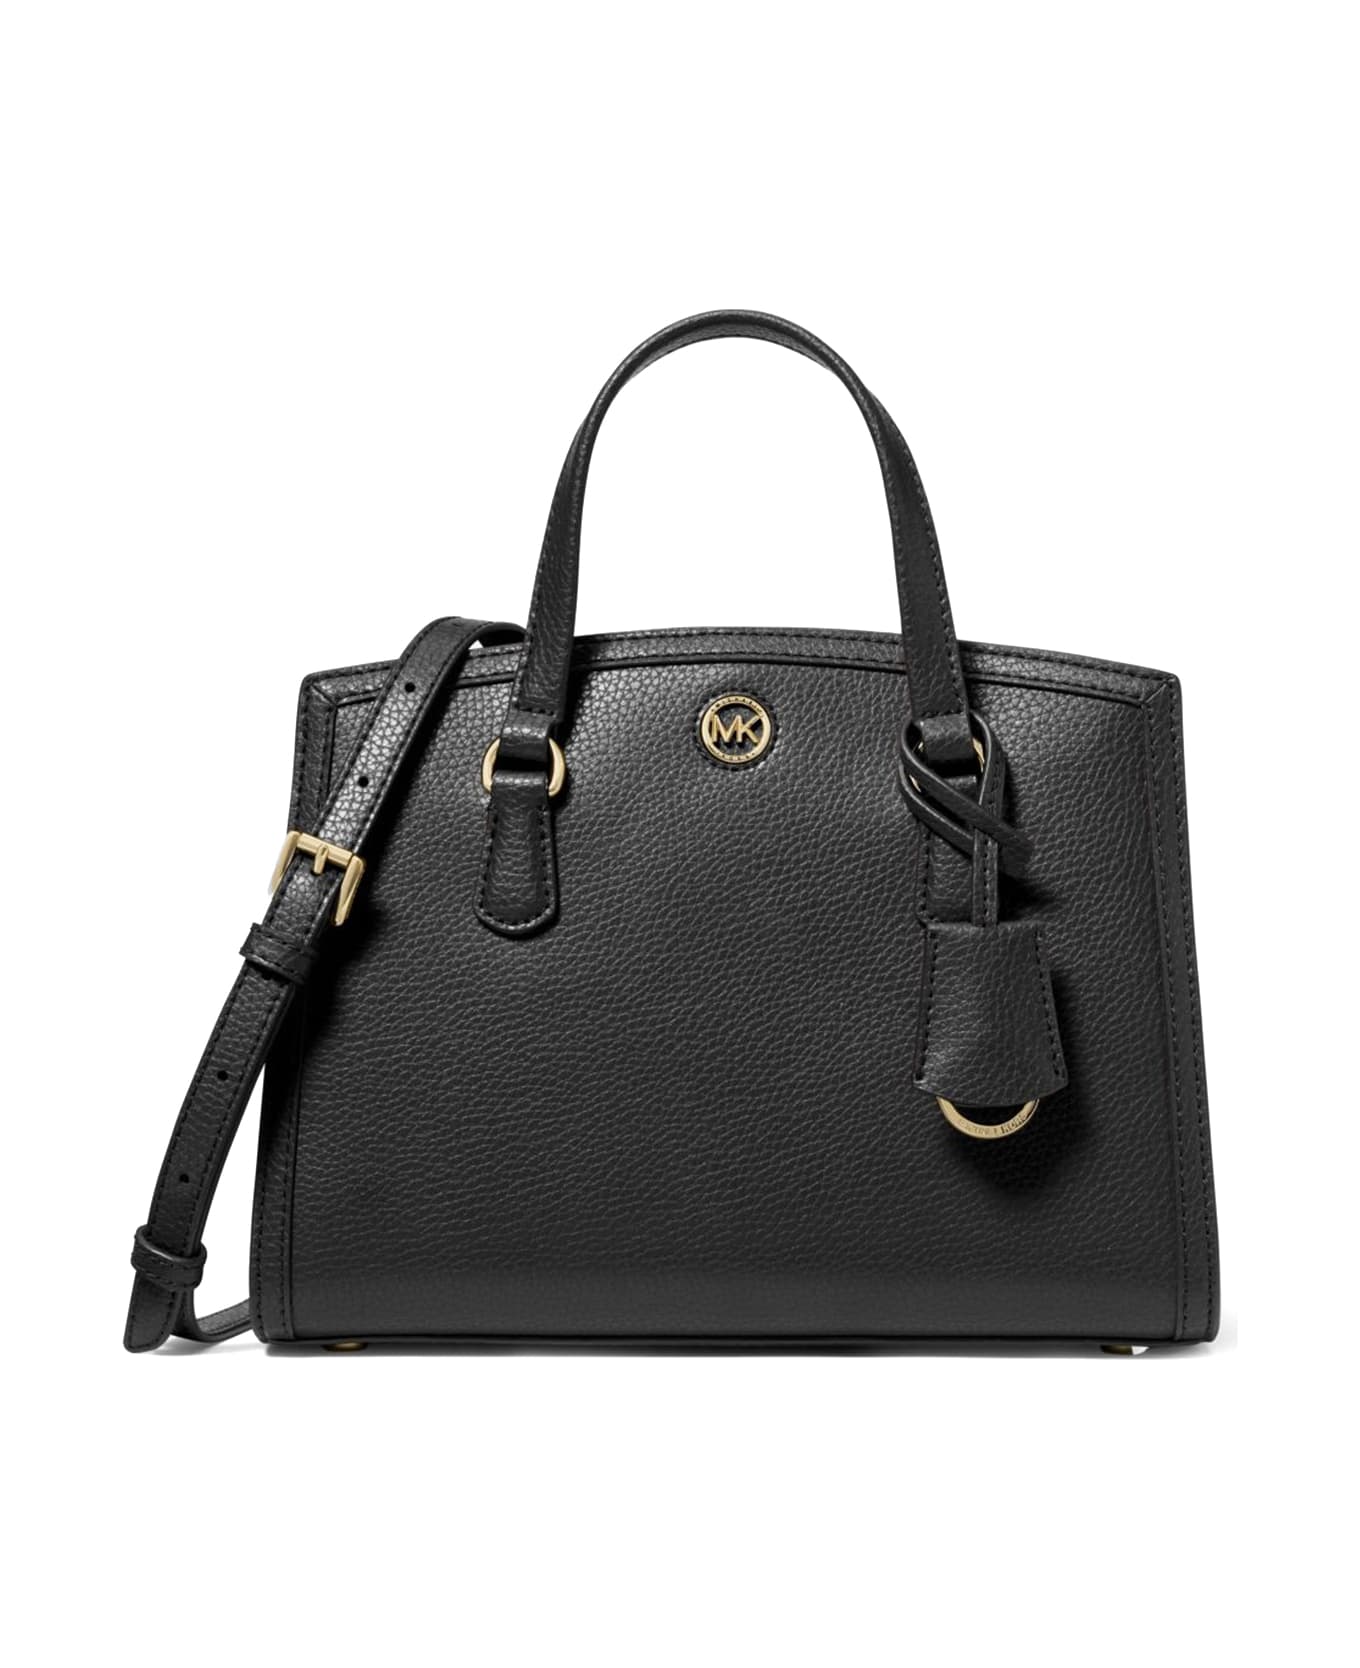 Michael Kors Small Chantal Bag In Grained Leather - BLACK トートバッグ